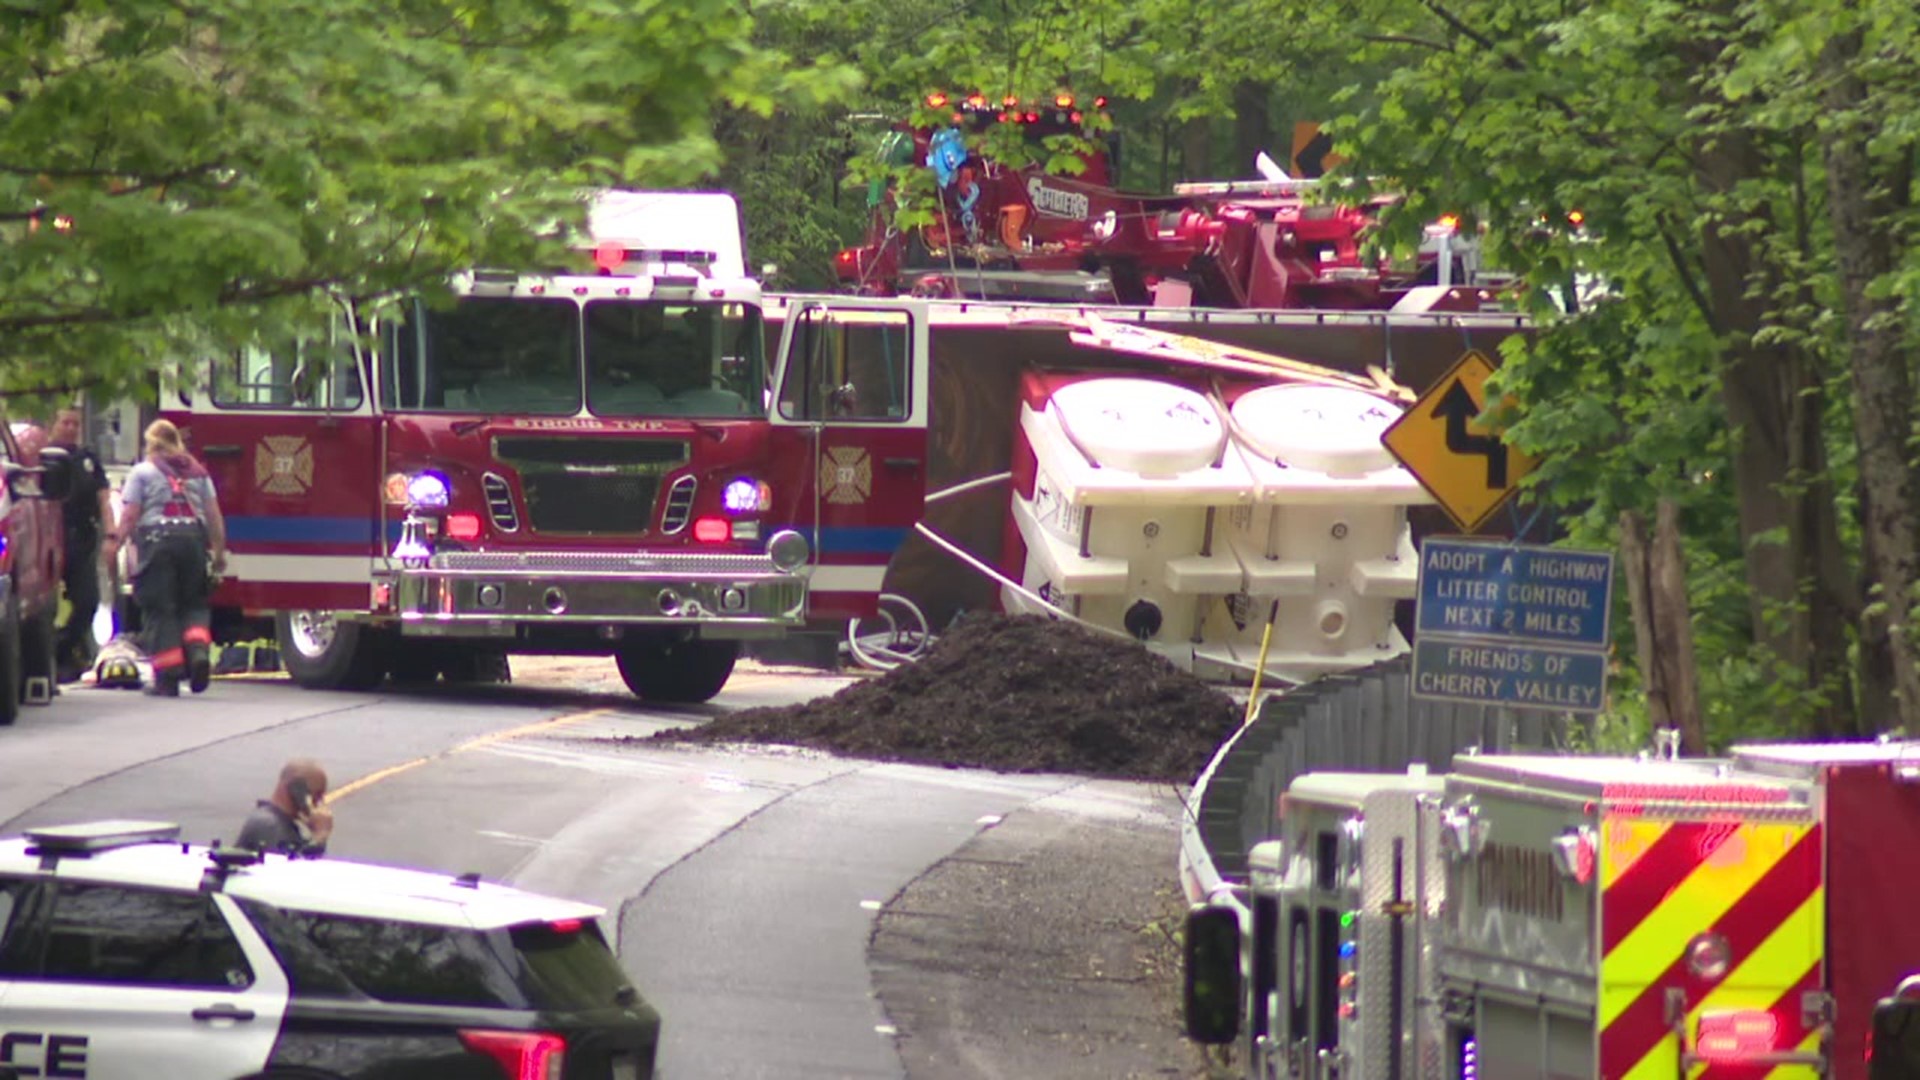 Several emergency personnel from Monroe and Northampton Counties were called to the scene just before 10 a.m.